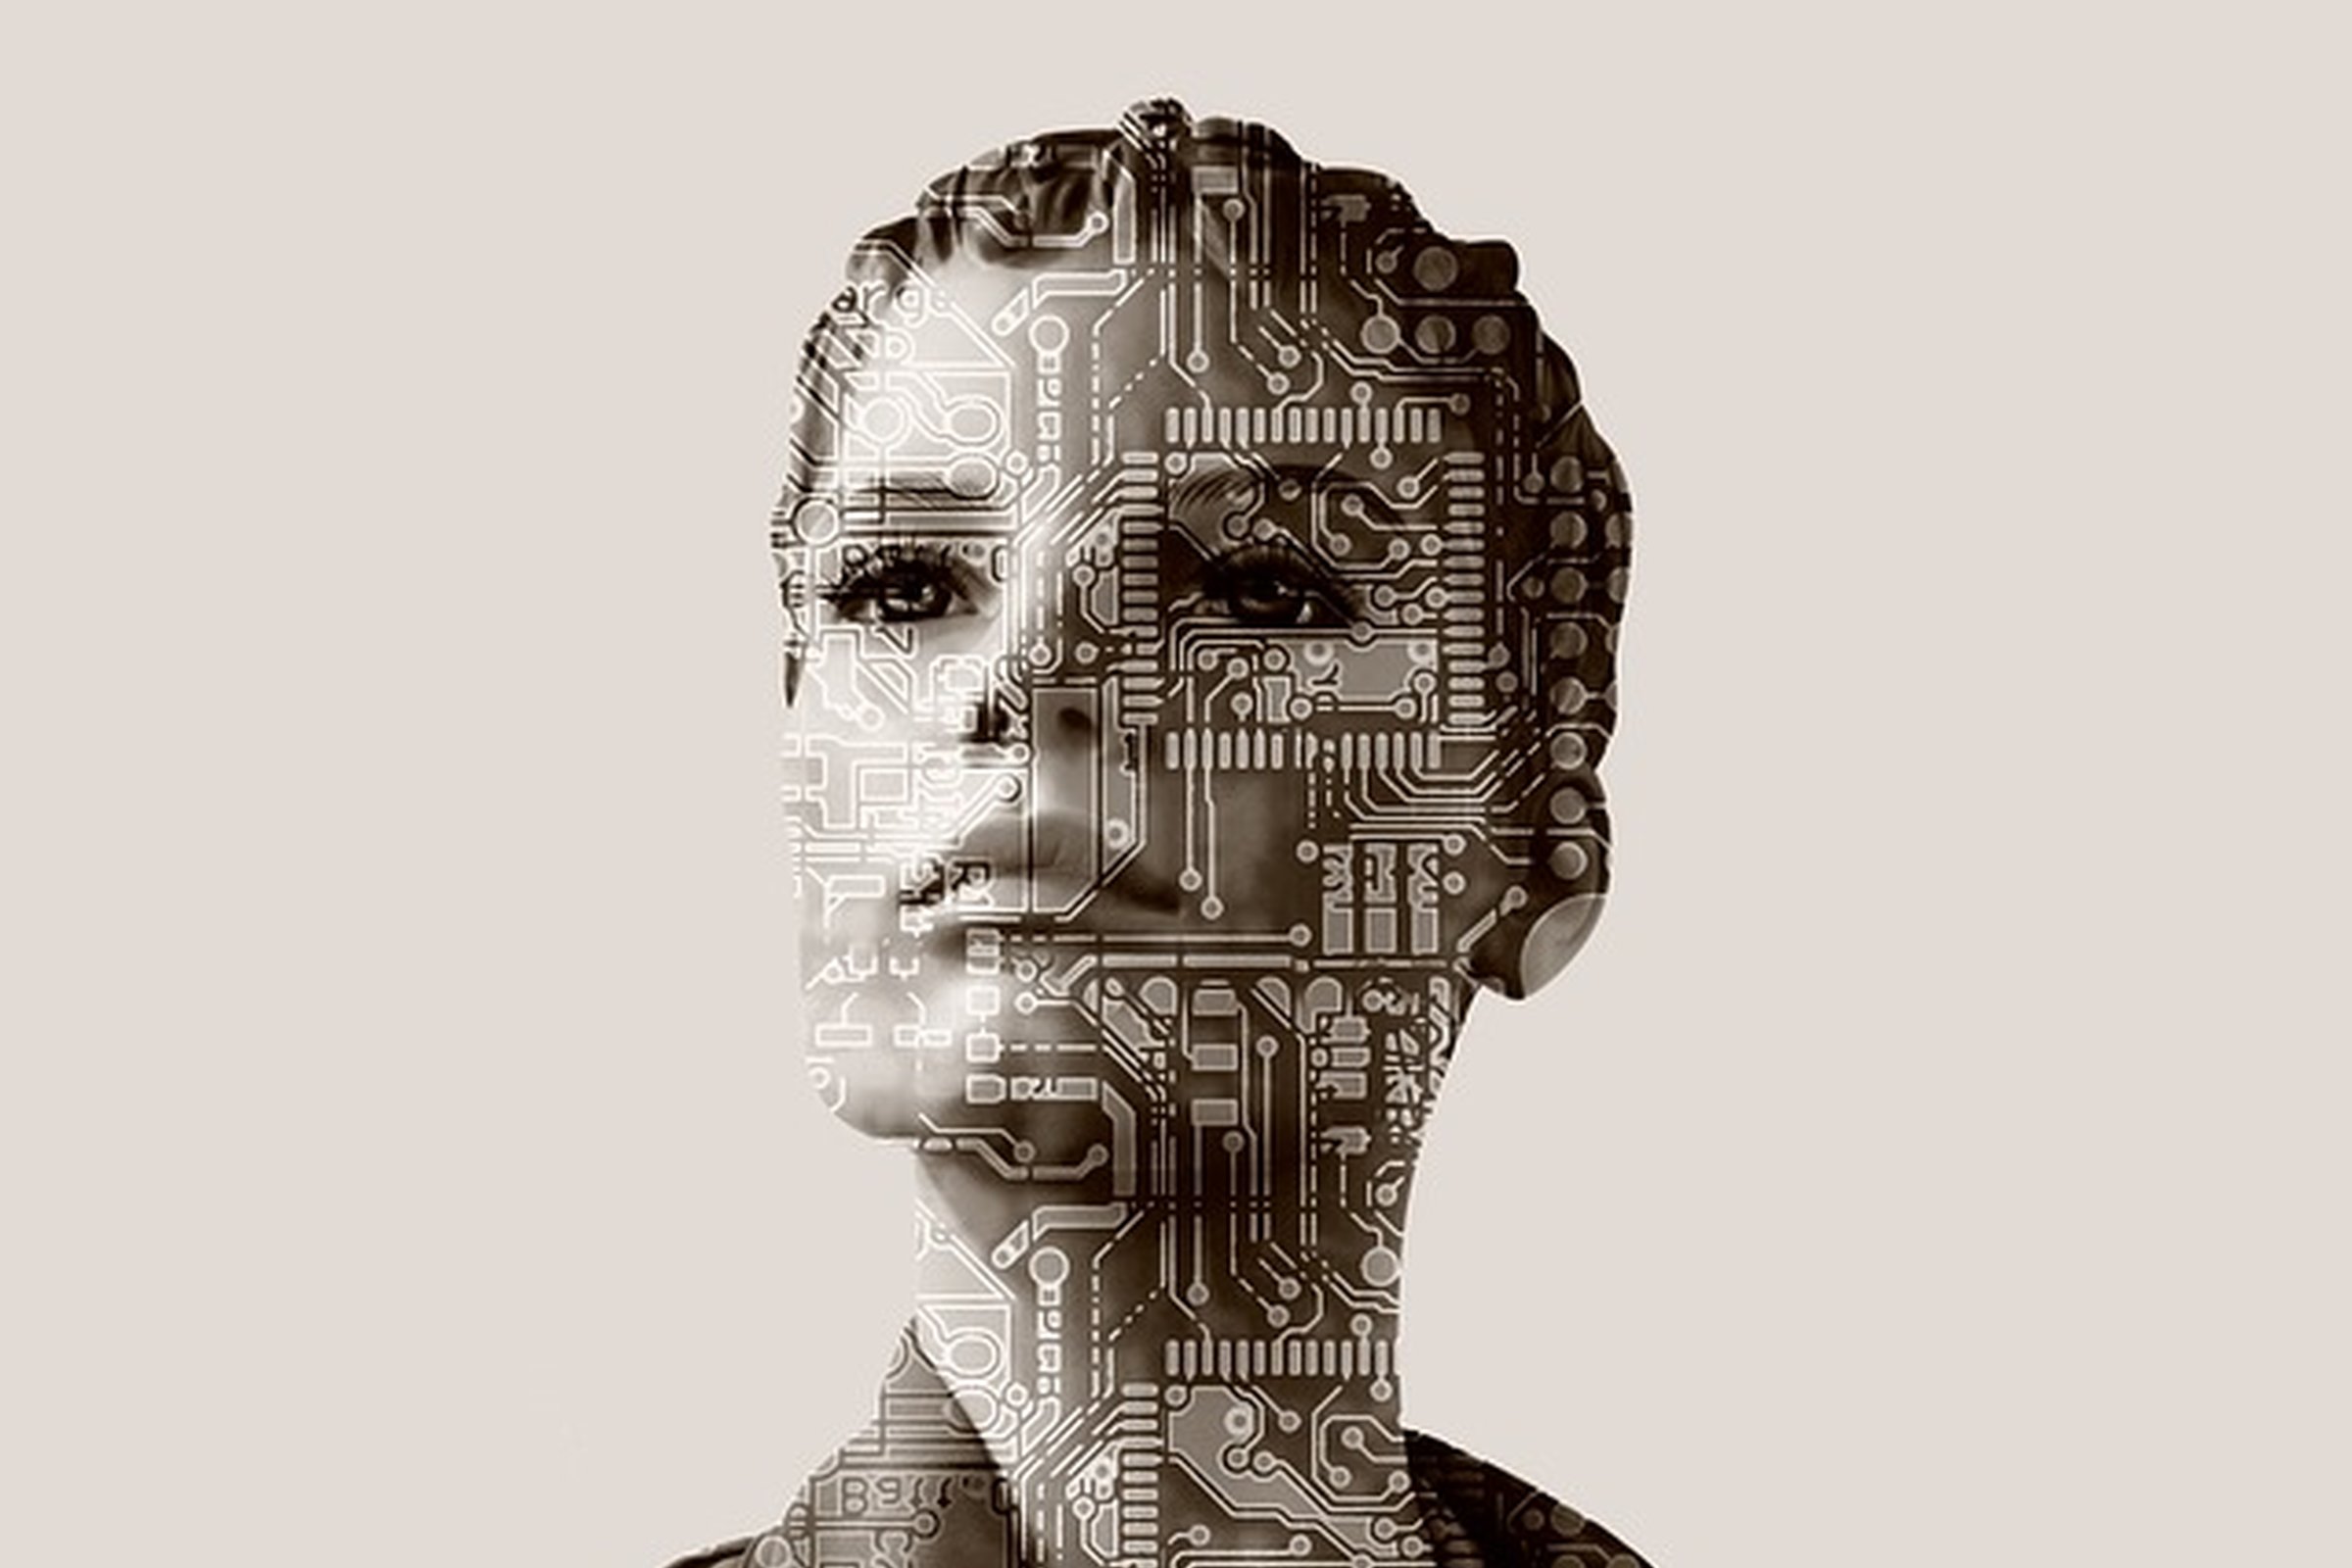 Robots, humans, and the ethics of AI